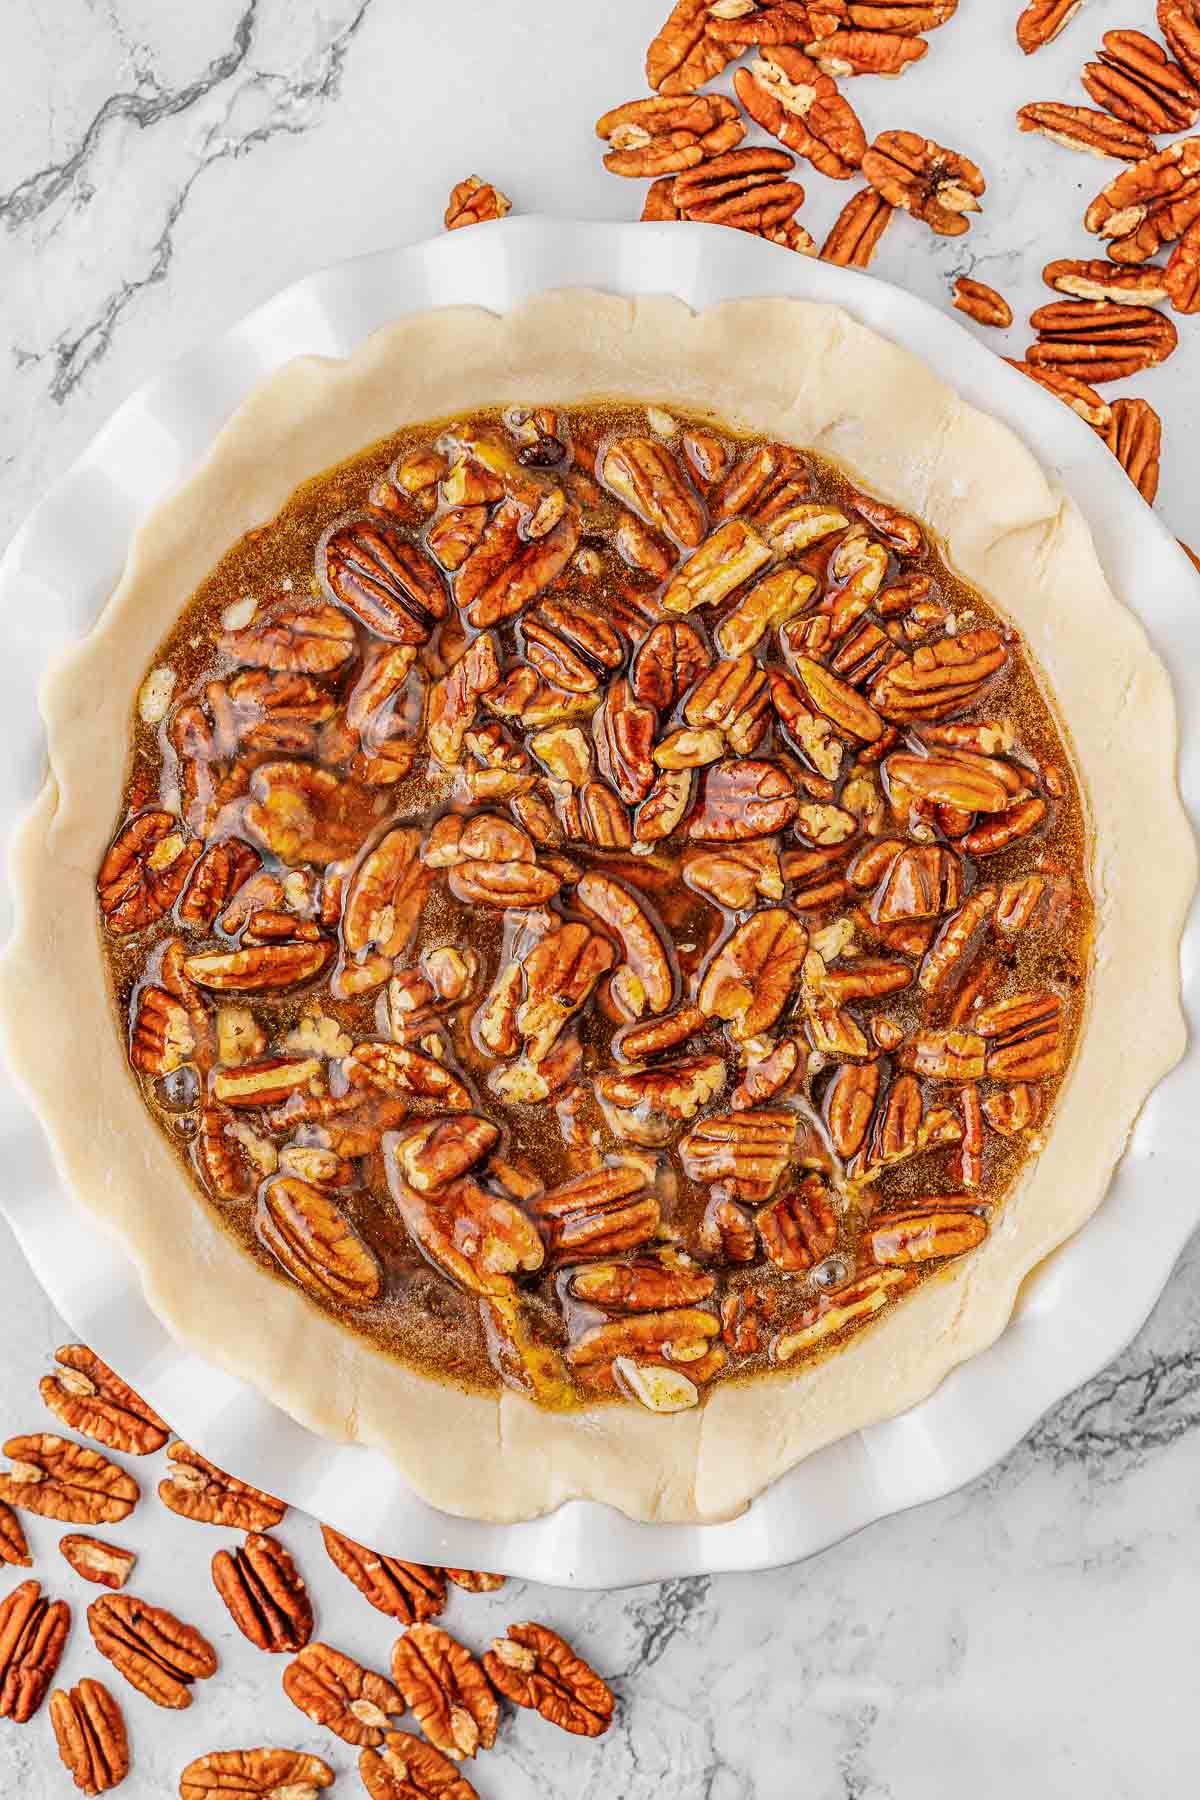 Unbaked pecan pie on a white plate with pecans around it.